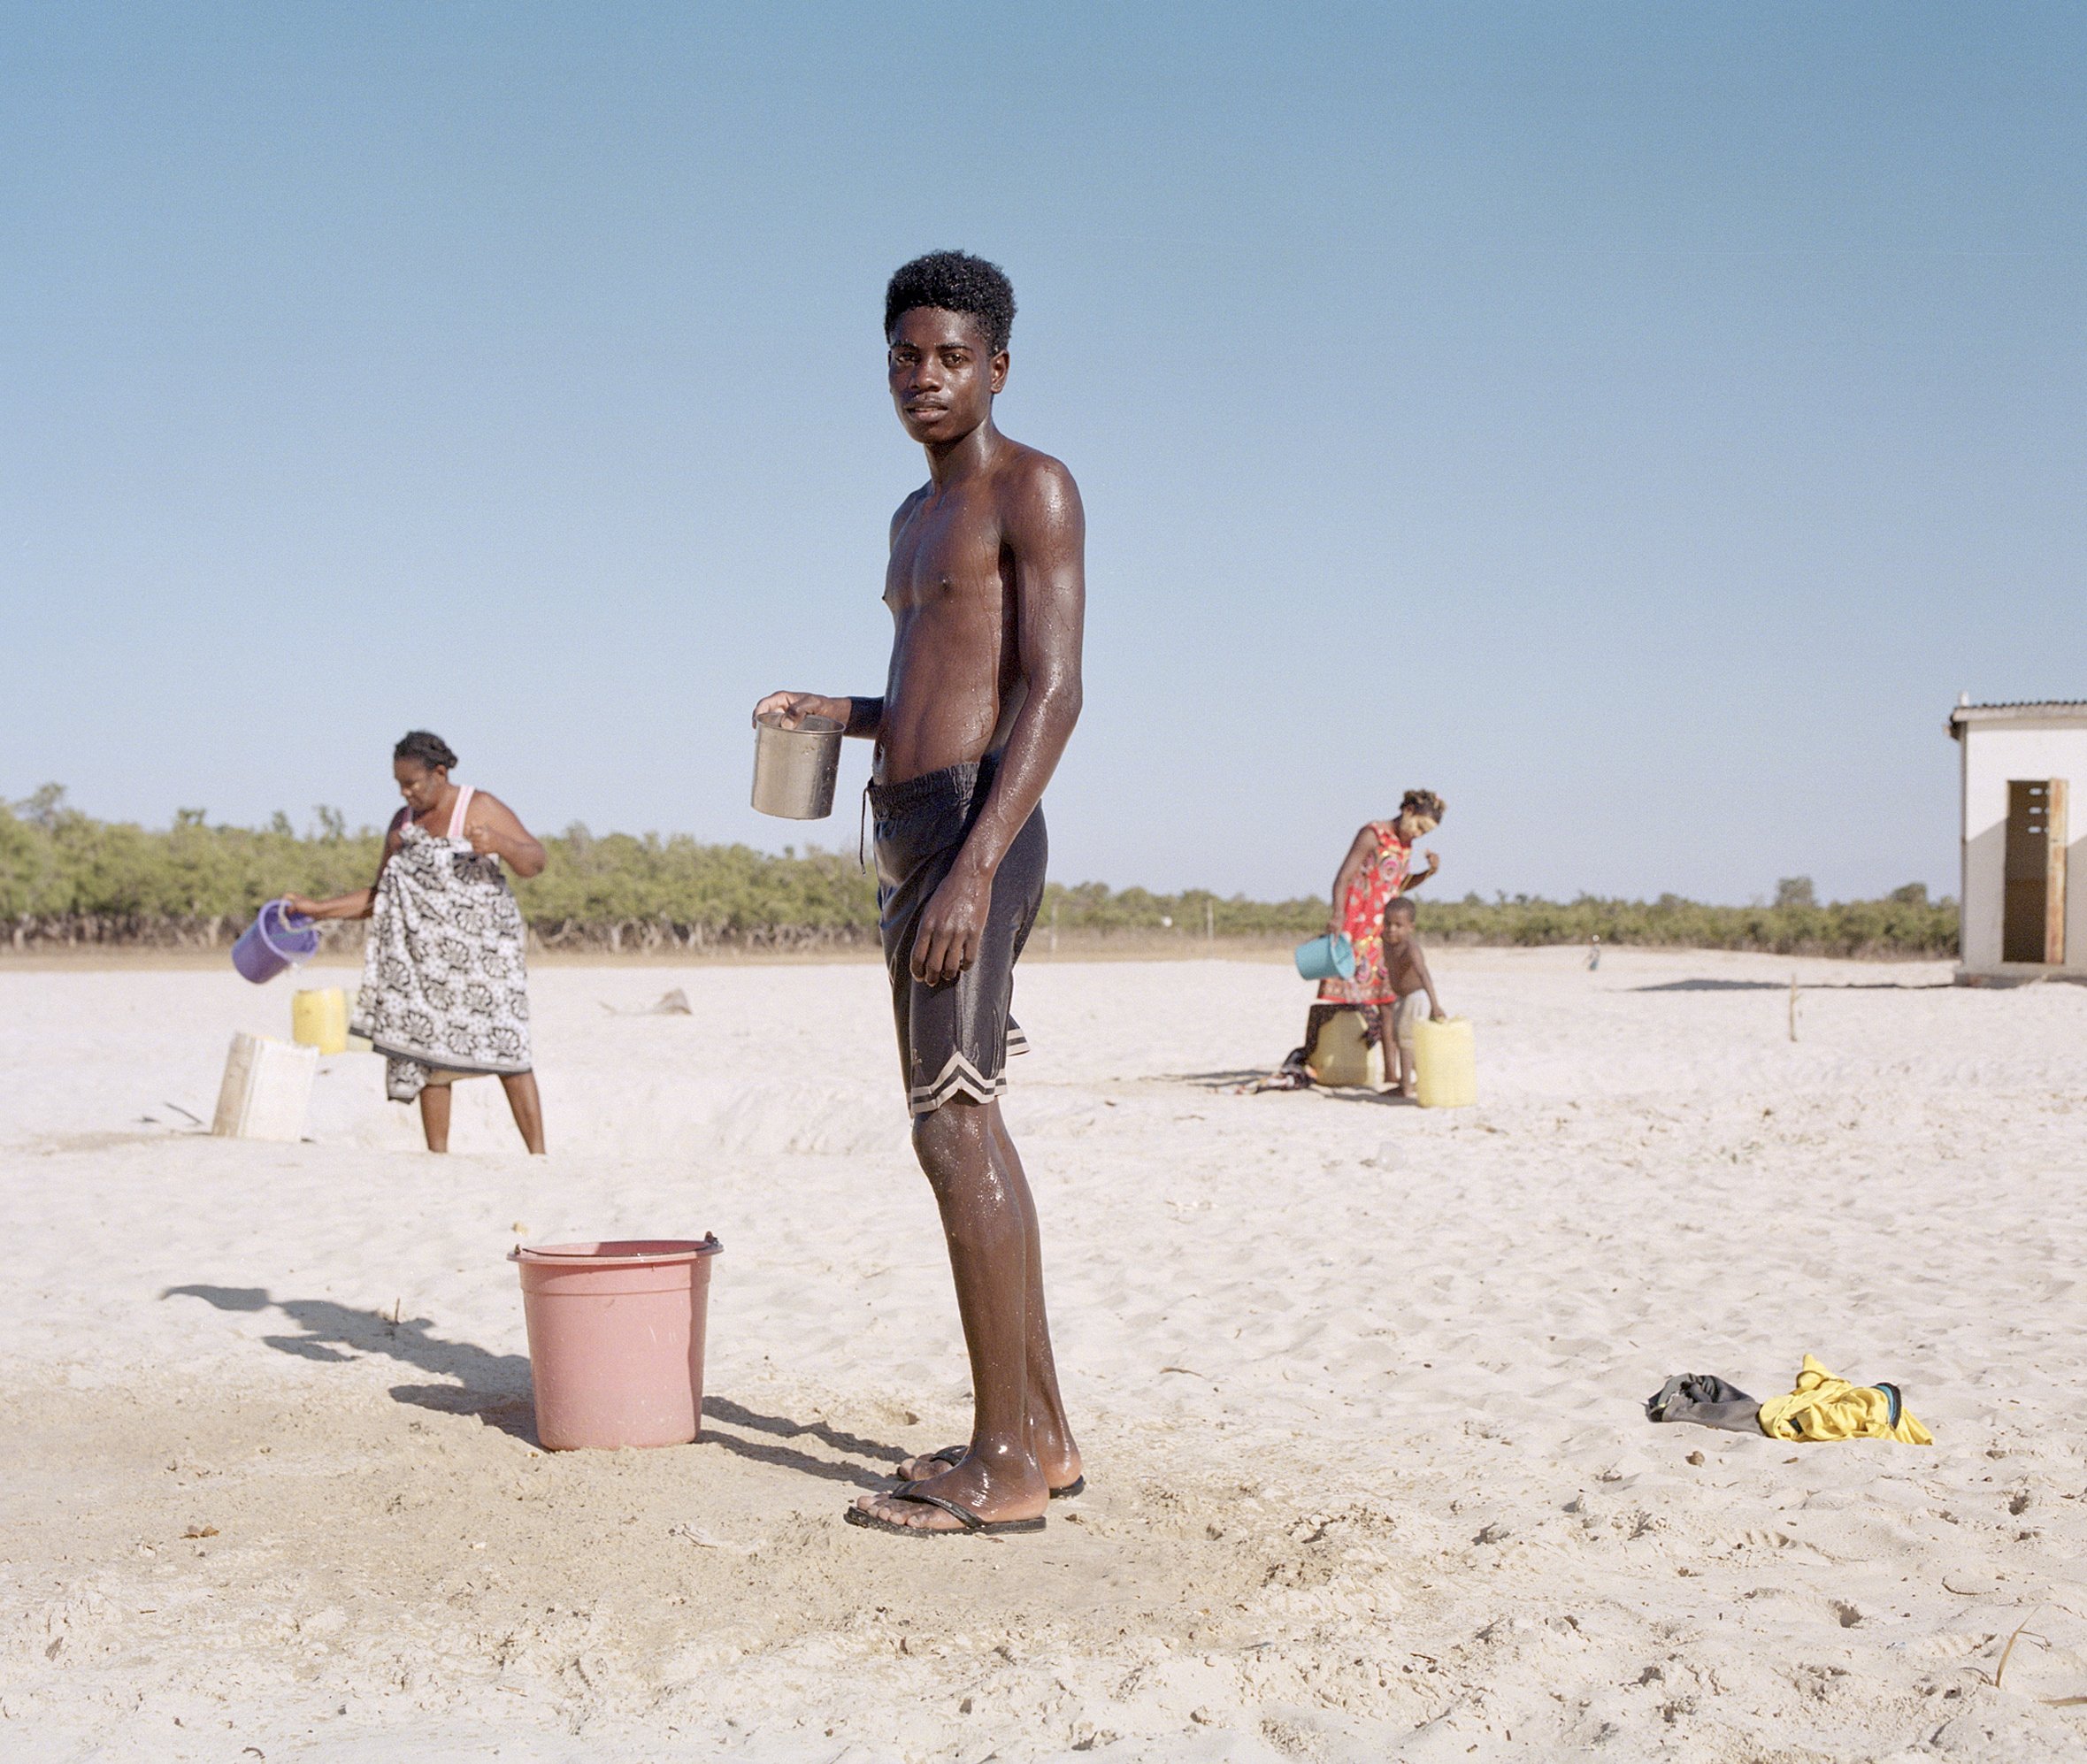  A teen boy washes salt off himself after a day of fishing, Madagascar  Part of a collection of images for WWF that form part of project on the communities that are safe guarding the precious mangroves of East &amp; Southern Africa.  